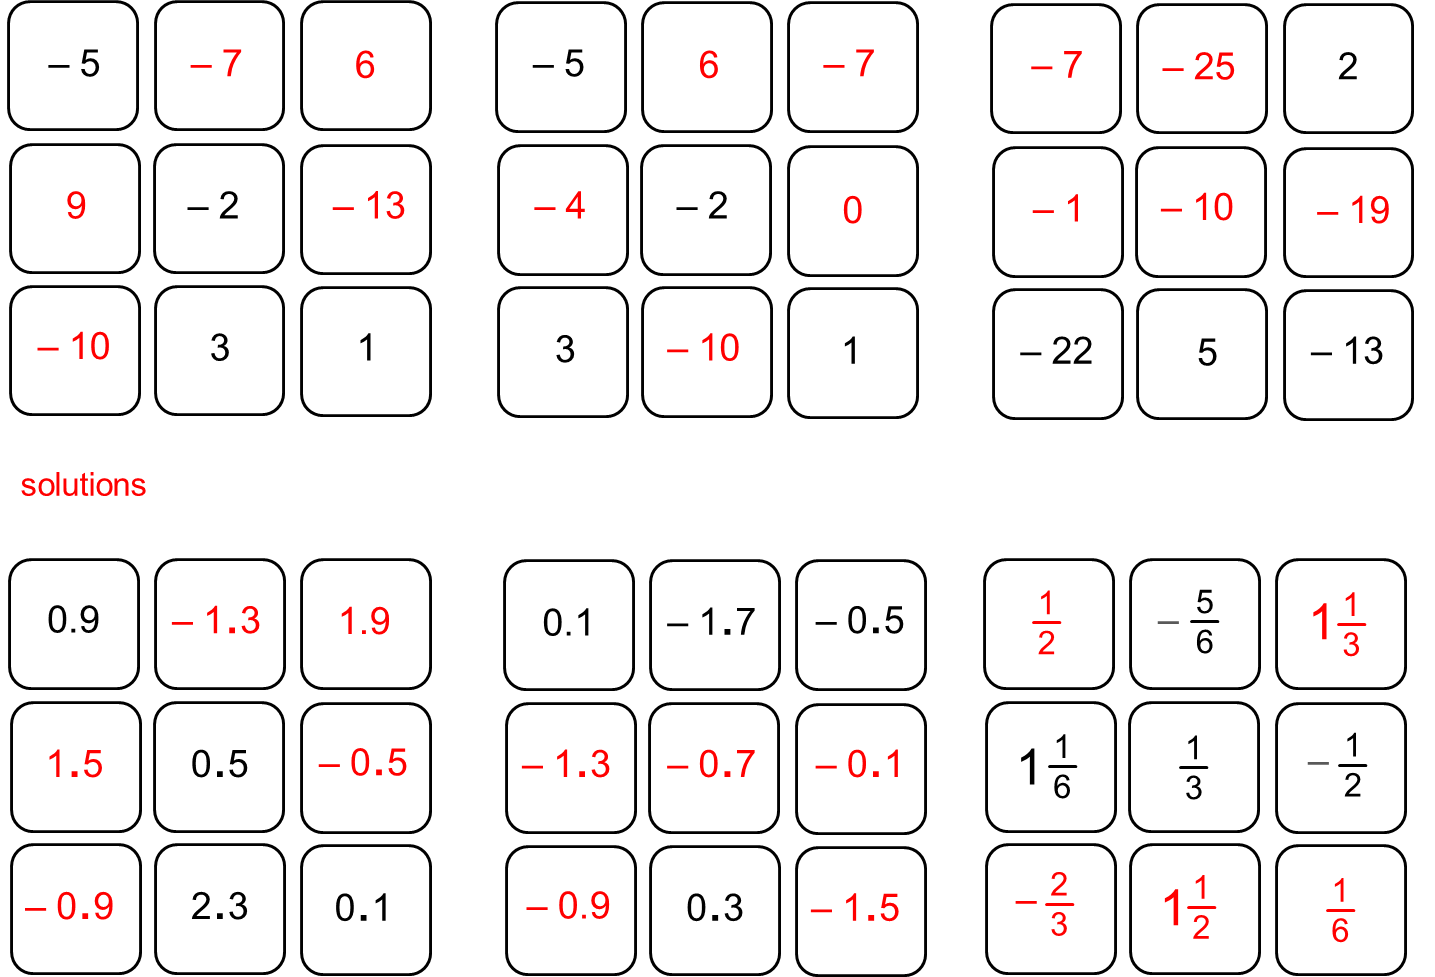 median-don-steward-magic-squares-with-negative-numbers